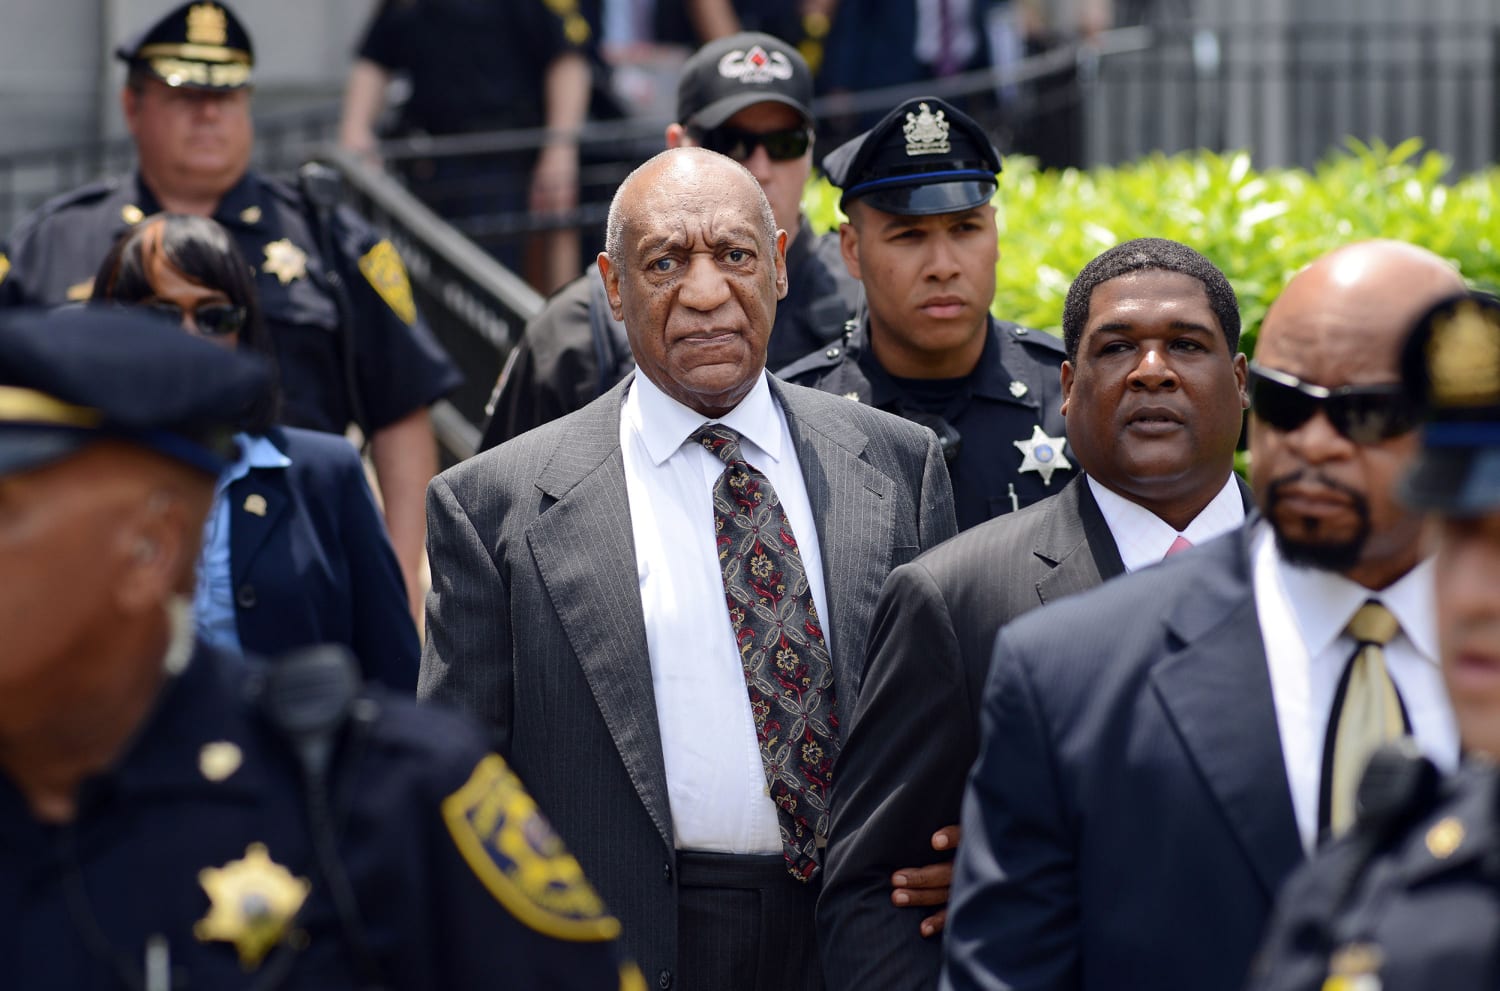 Bill Cosby prosecutors ask U.S. Supreme Court to review decision to overturn conviction